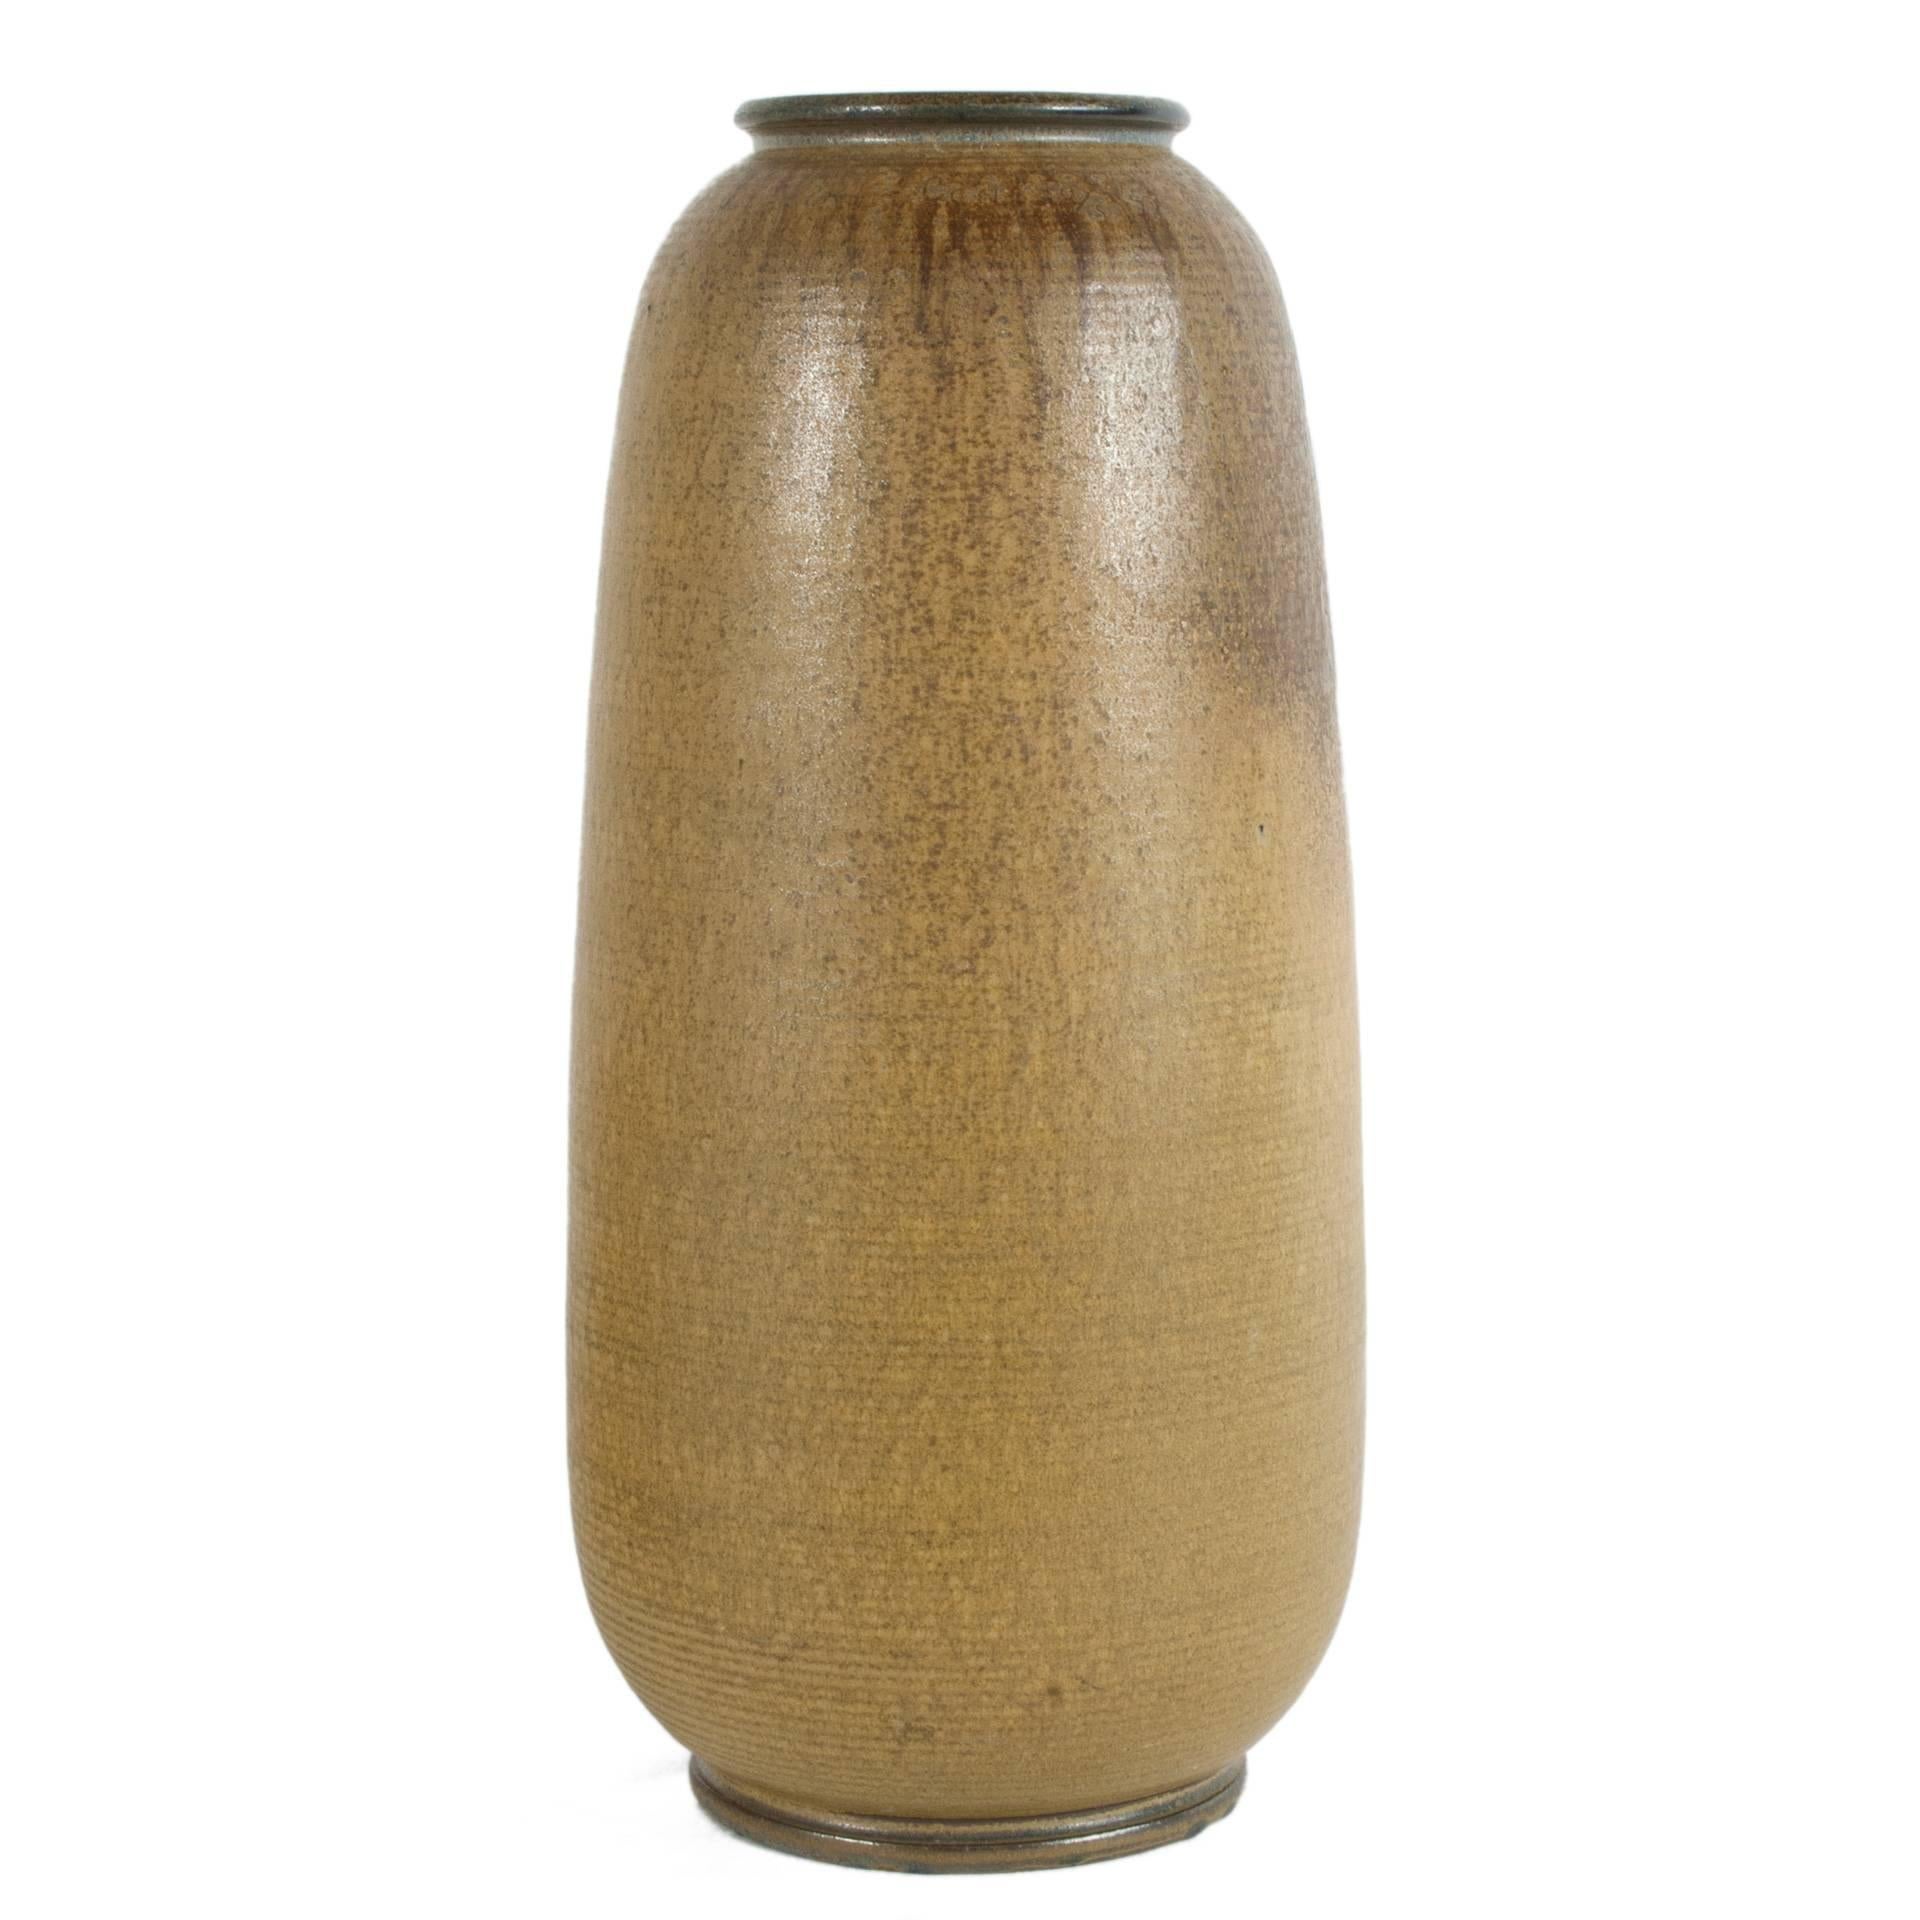 Vase in stoneware by Wallakra.